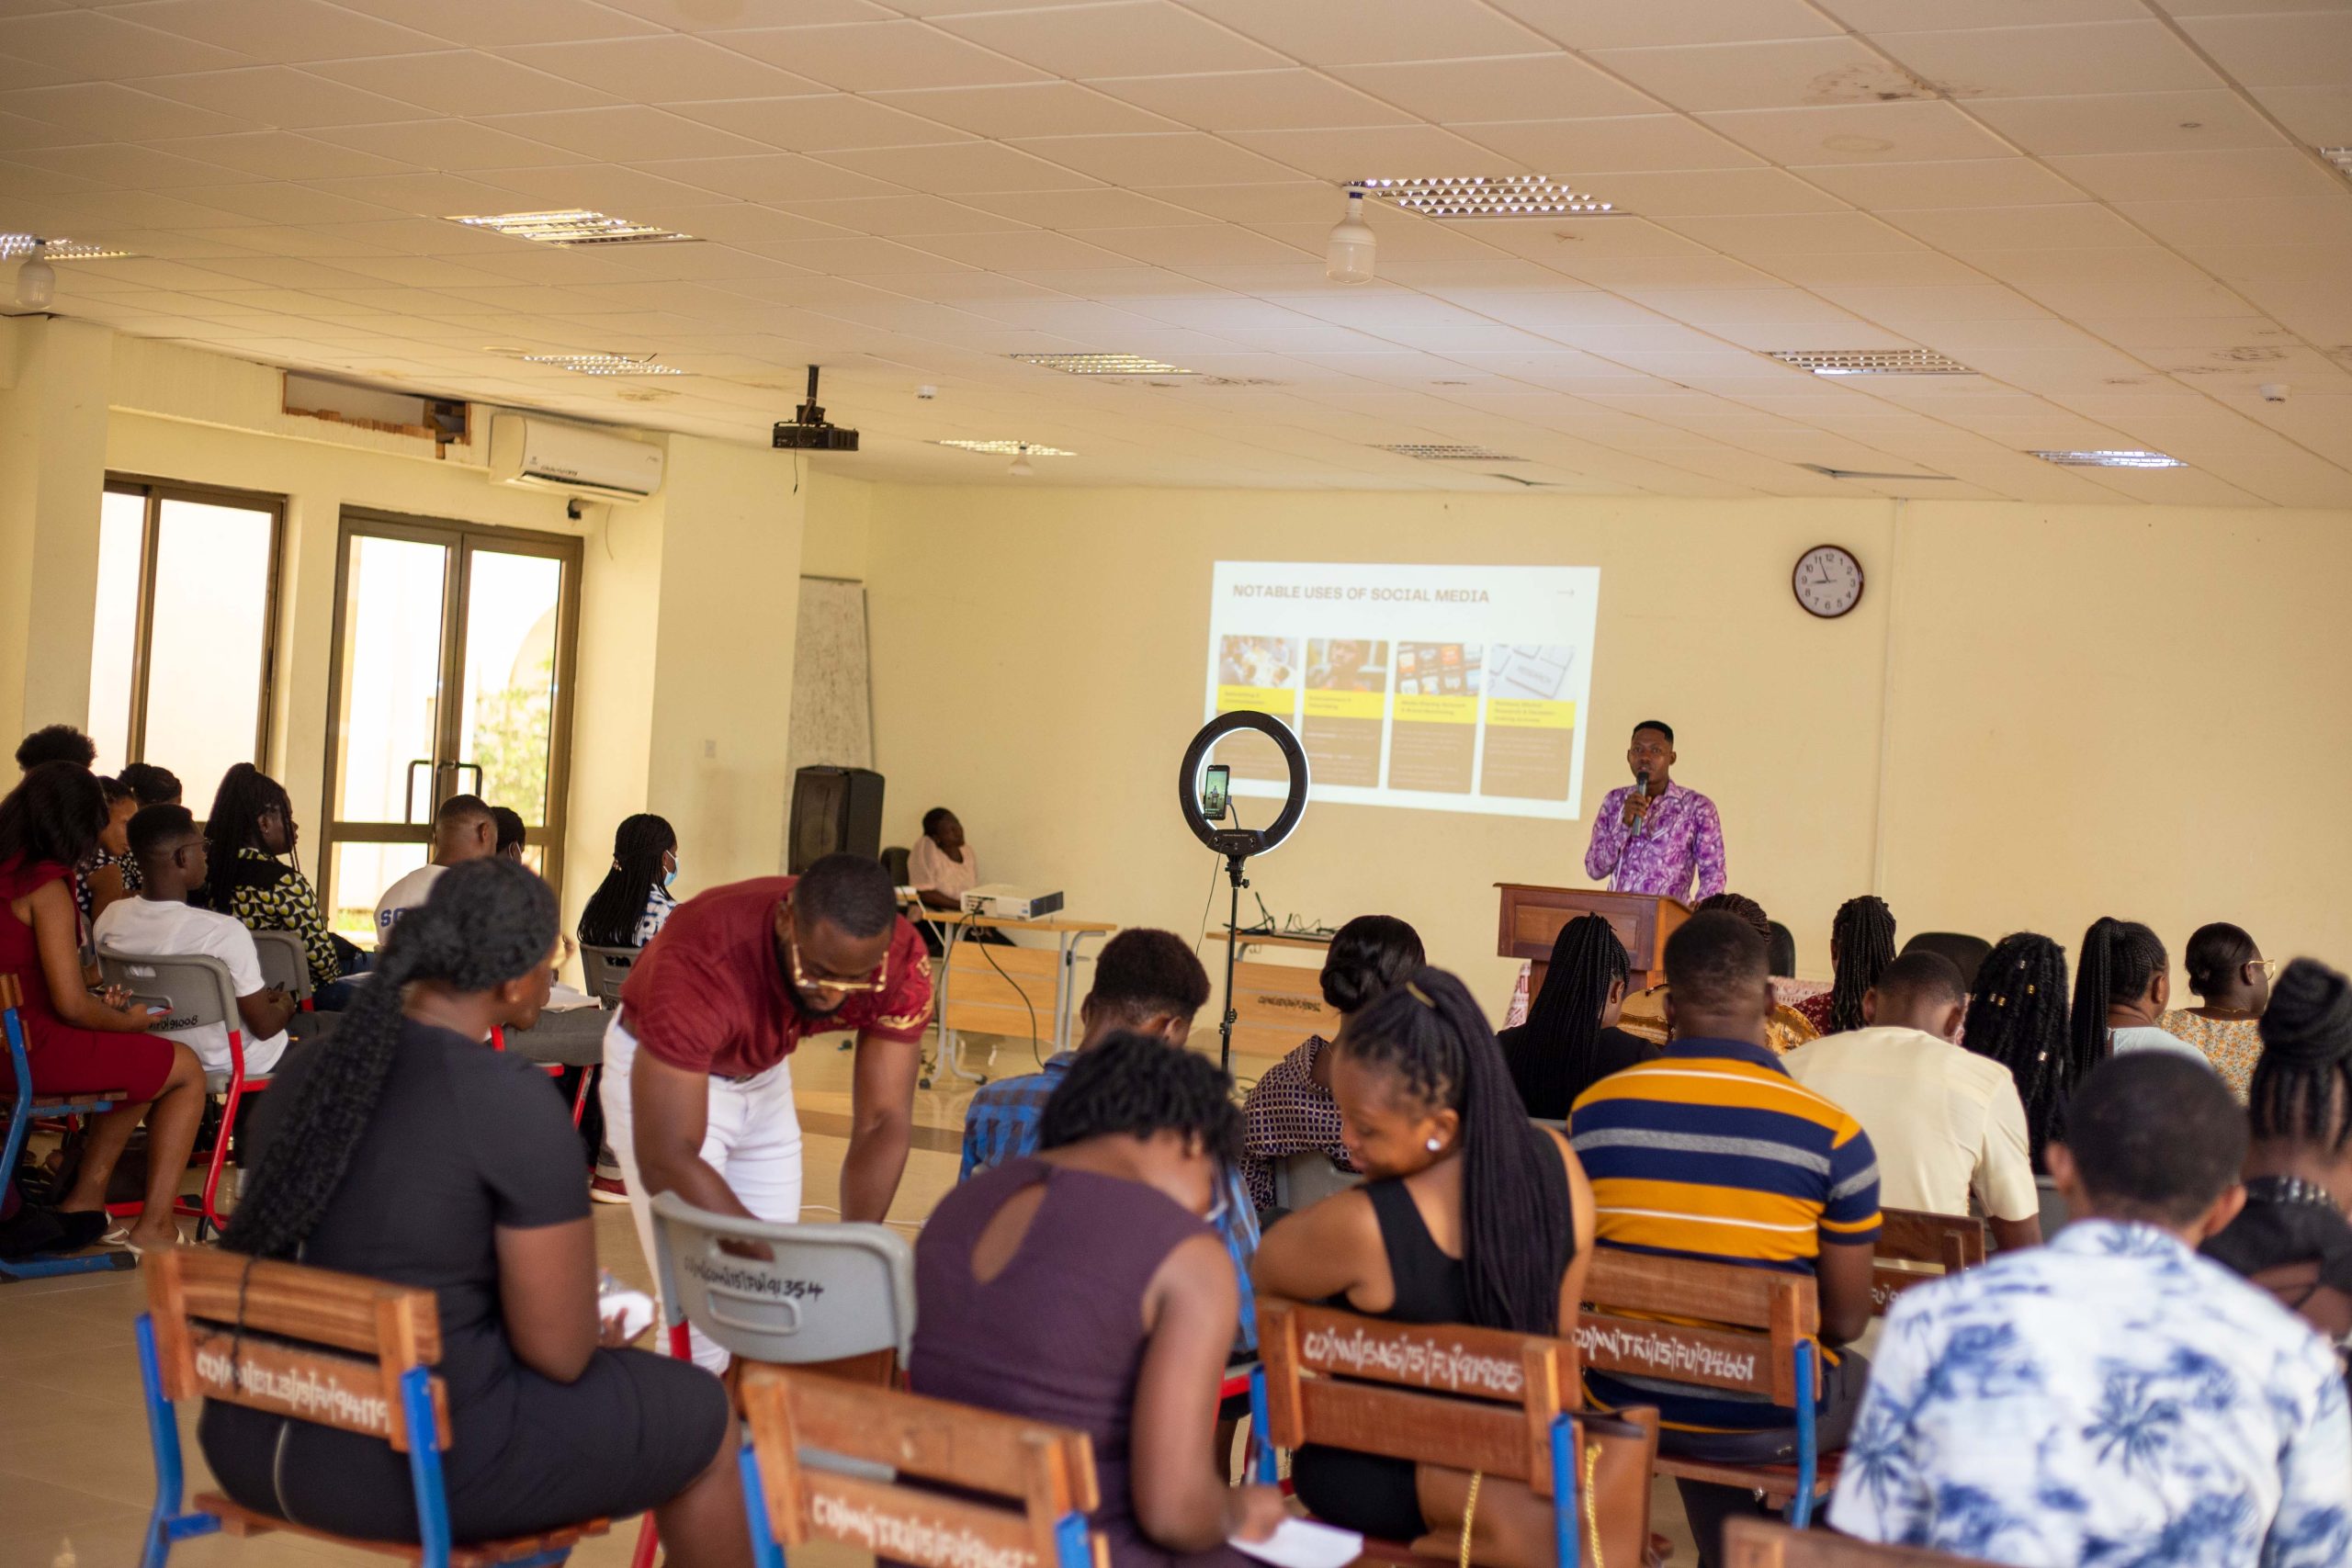 Prince Akpah Delivering 4th Guest Lecture at Central University on Emerging Trends & Opportunities in Social Media and Digital Marketing